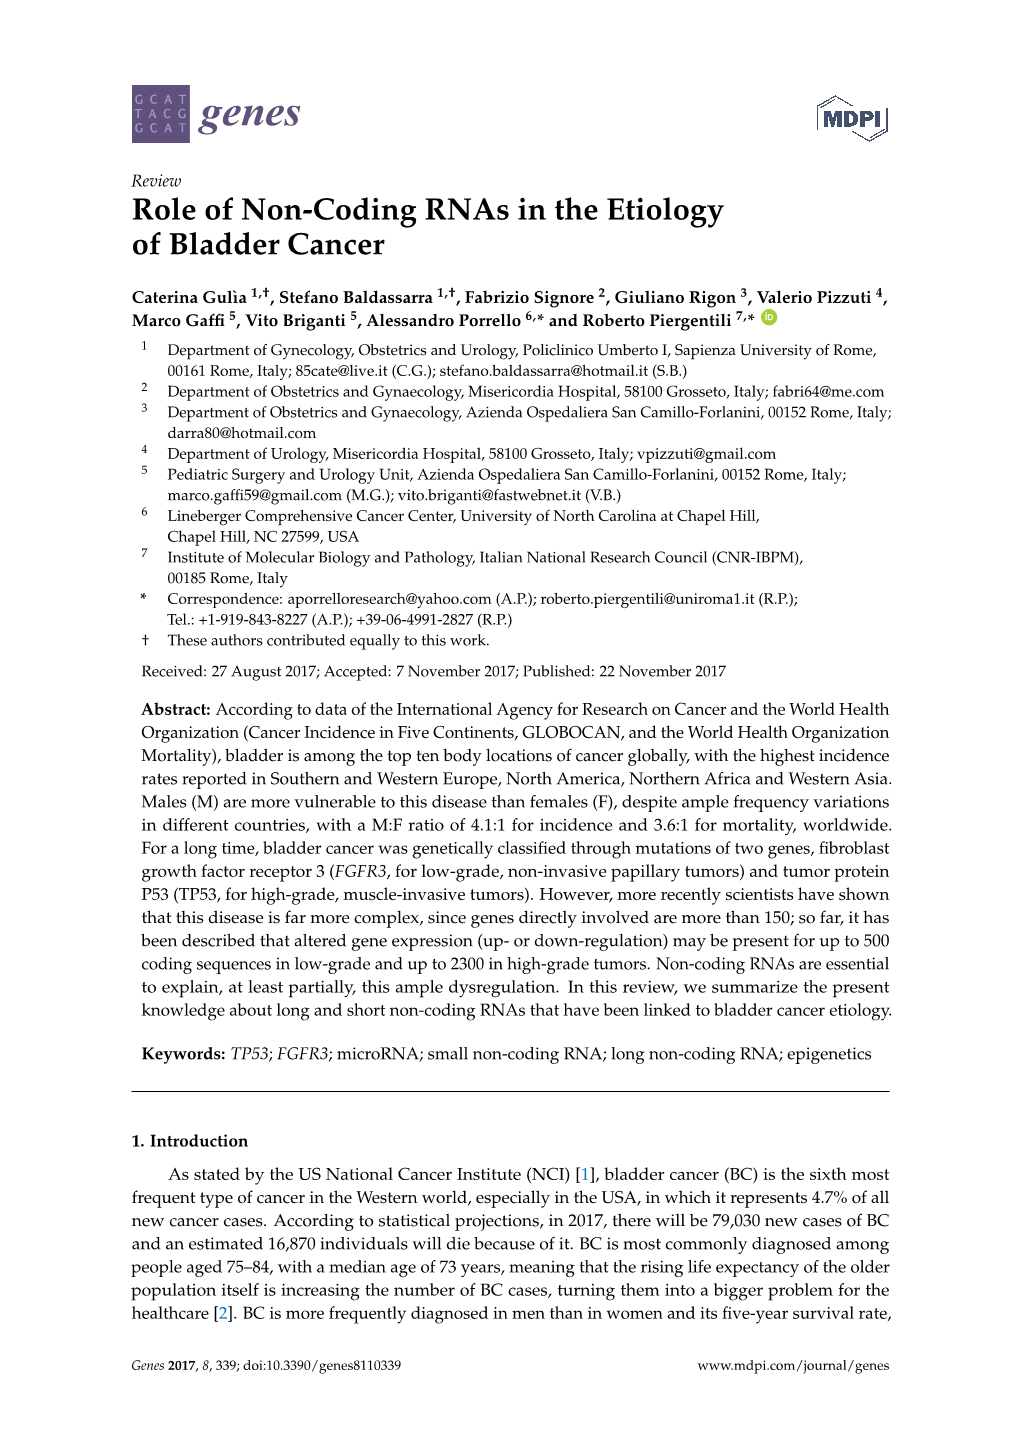 Role of Non-Coding Rnas in the Etiology of Bladder Cancer